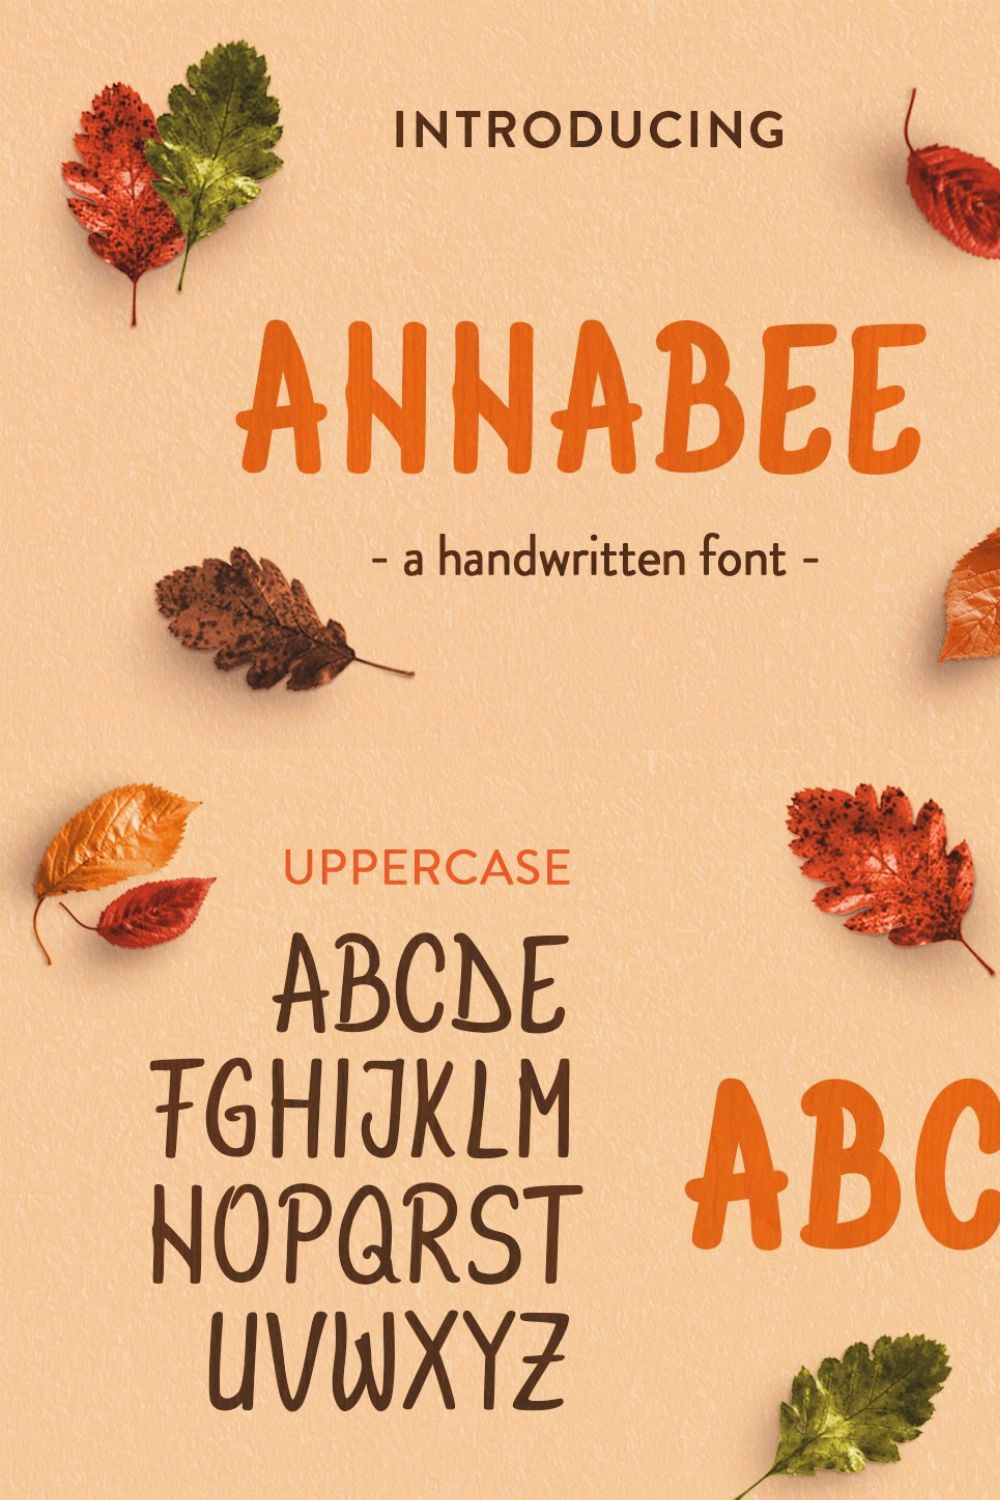 Annabee pinterest preview image.